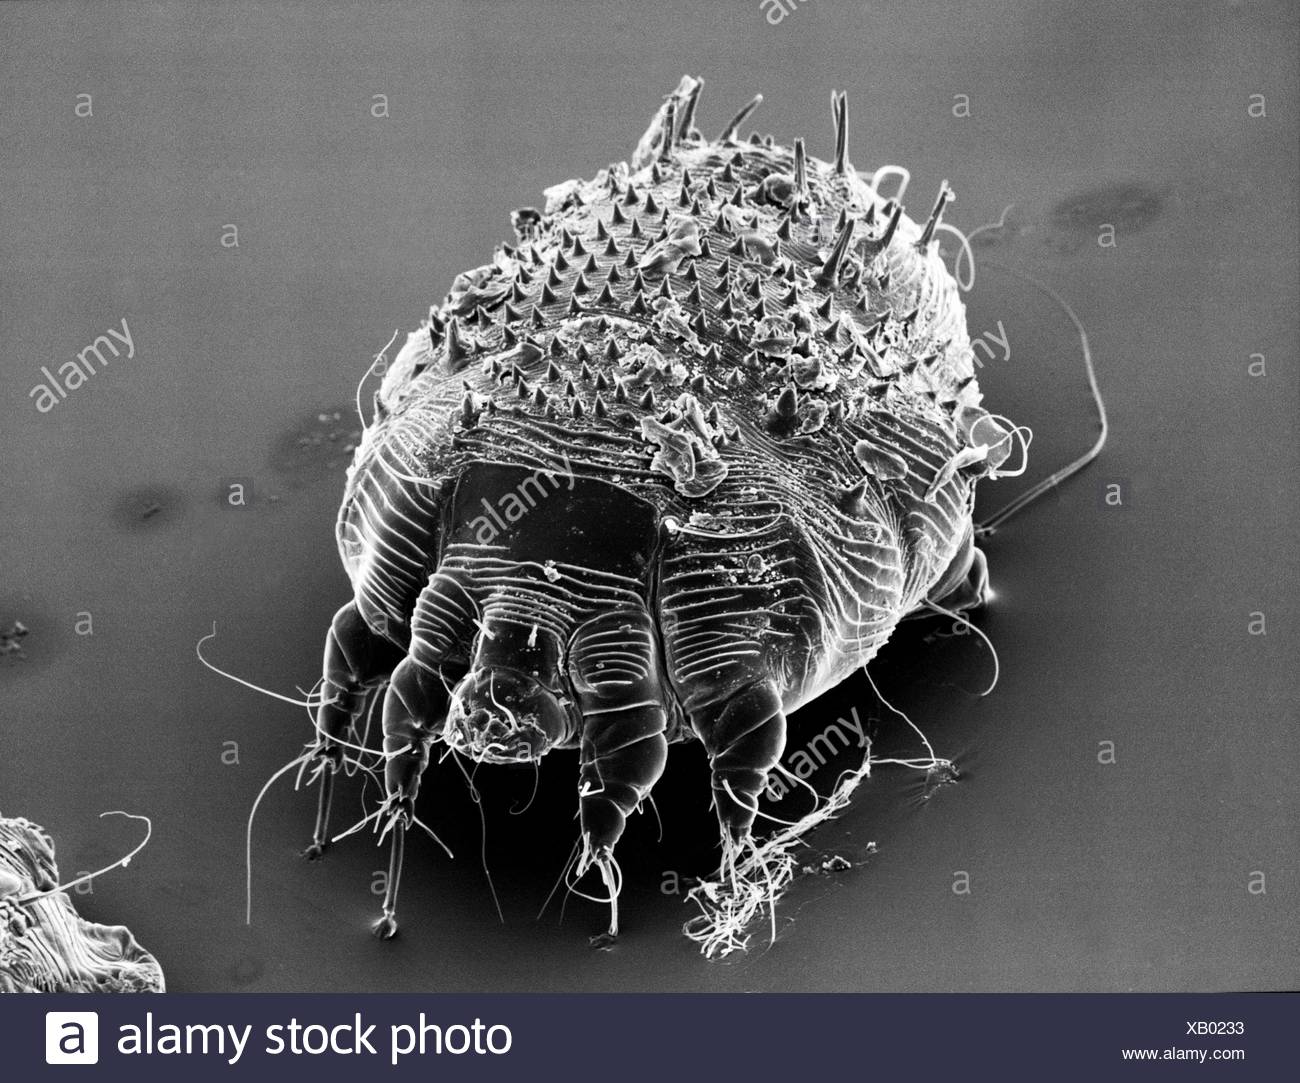 Mite Scabies Itch Photo Taken With An Electron Microscope Stock